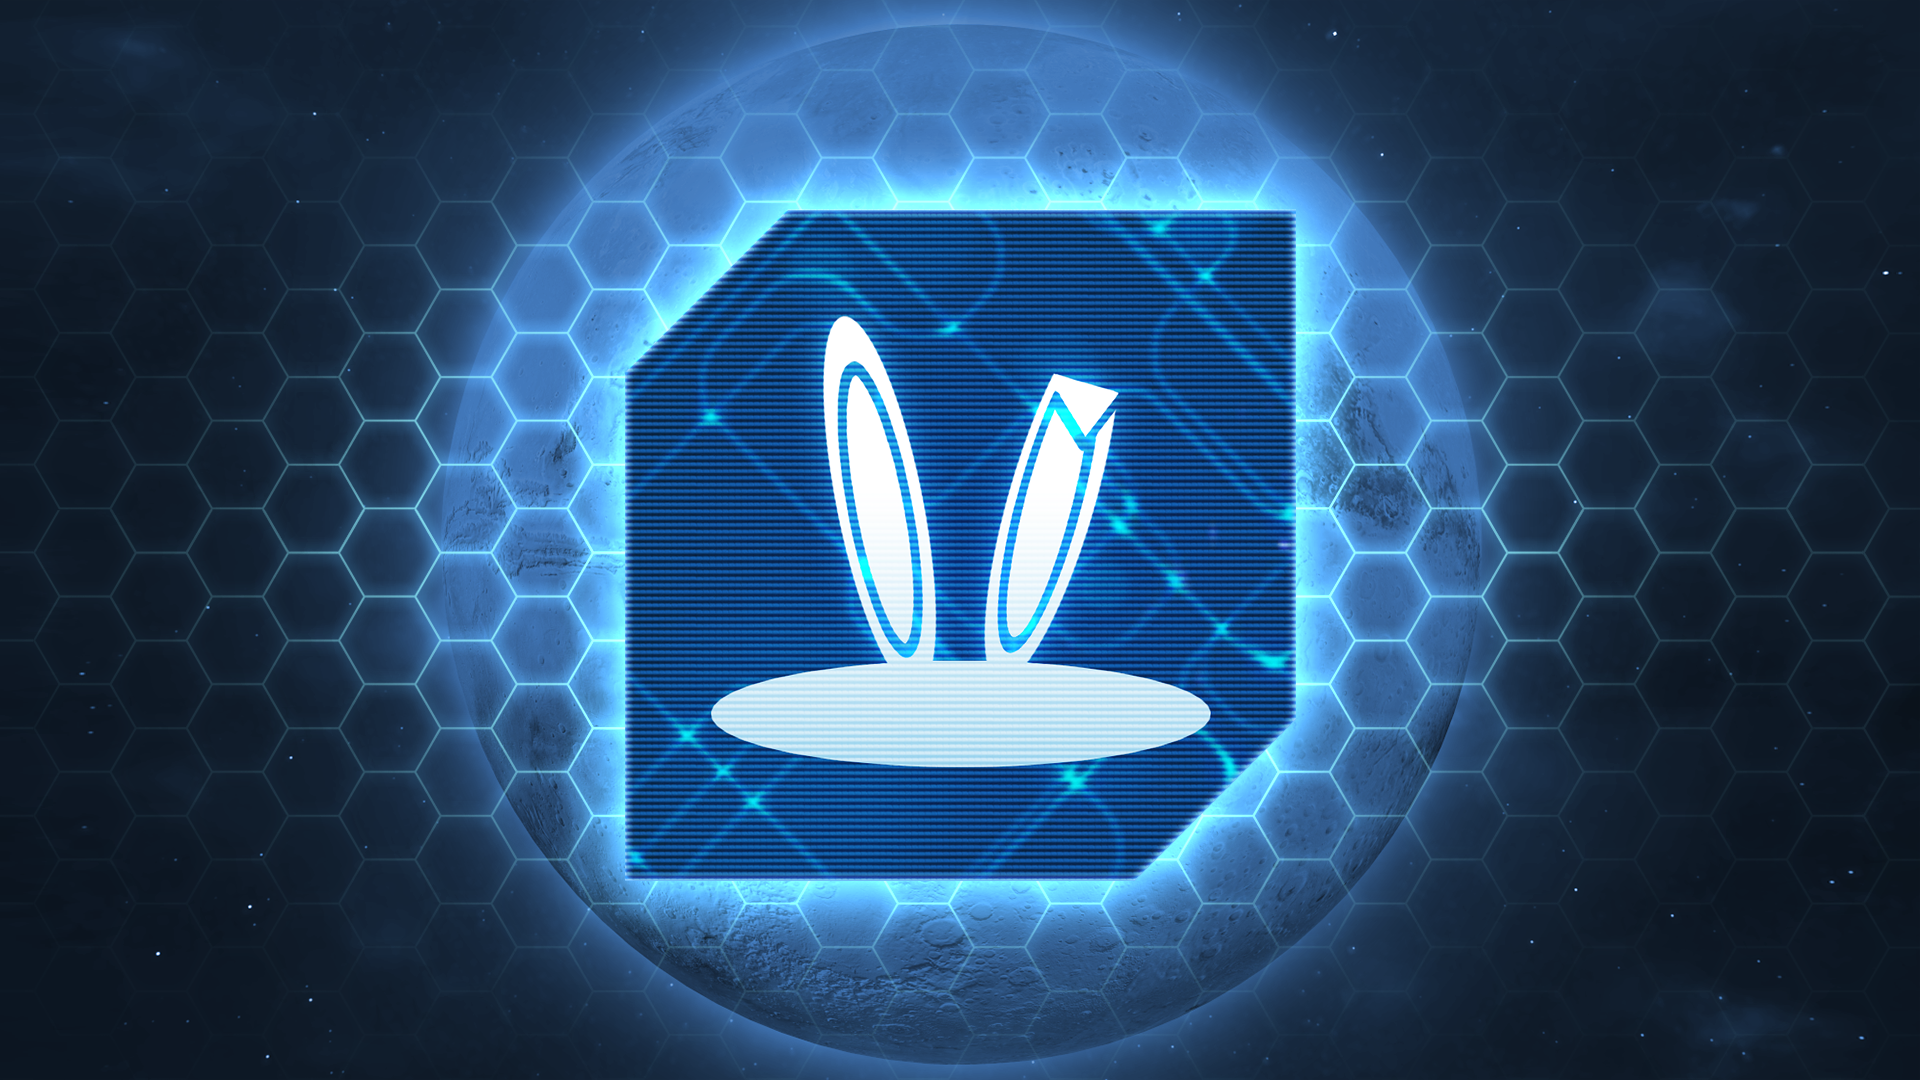 Icon for The Rabbit Hole